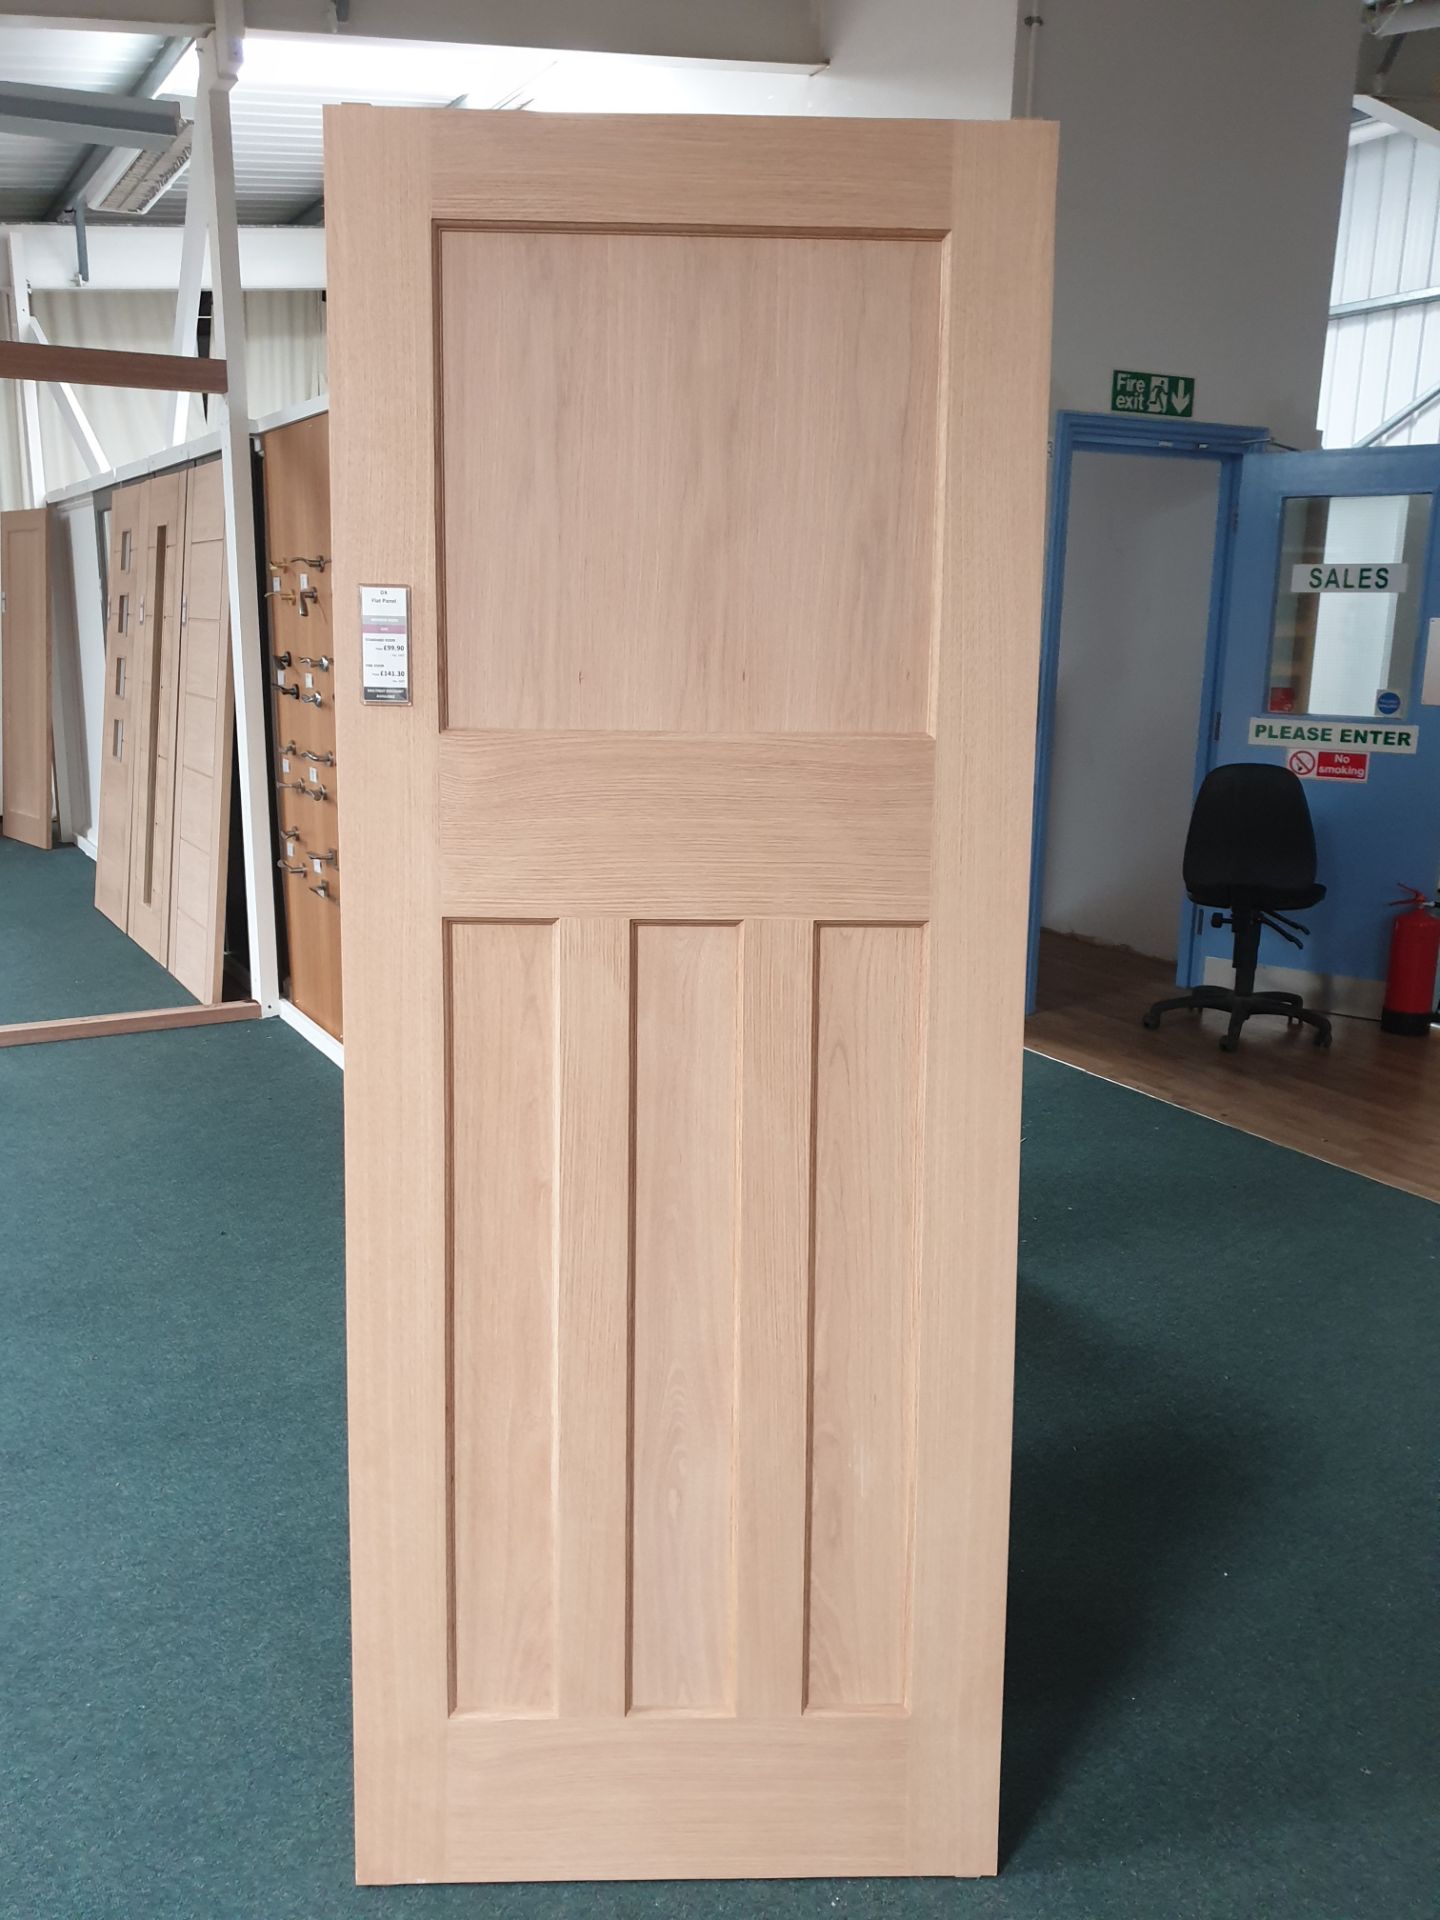 3 x DX 4 Flat Panel Fire Door AWOFPDX4P33FD 78”x33”x44mm - Lots to be handed out in order they are